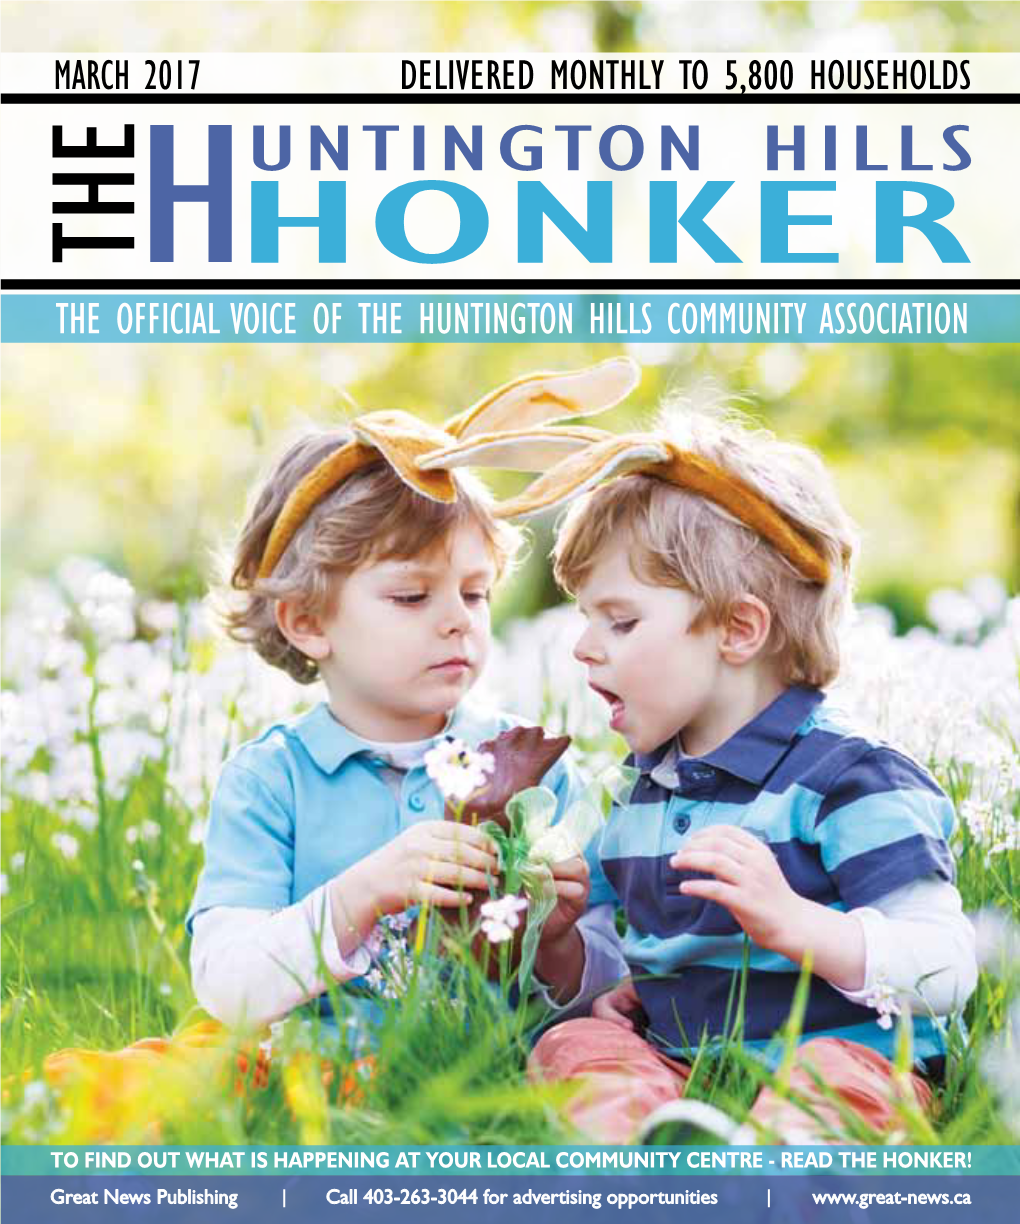 The Official Voice of the Huntington Hills Community Association